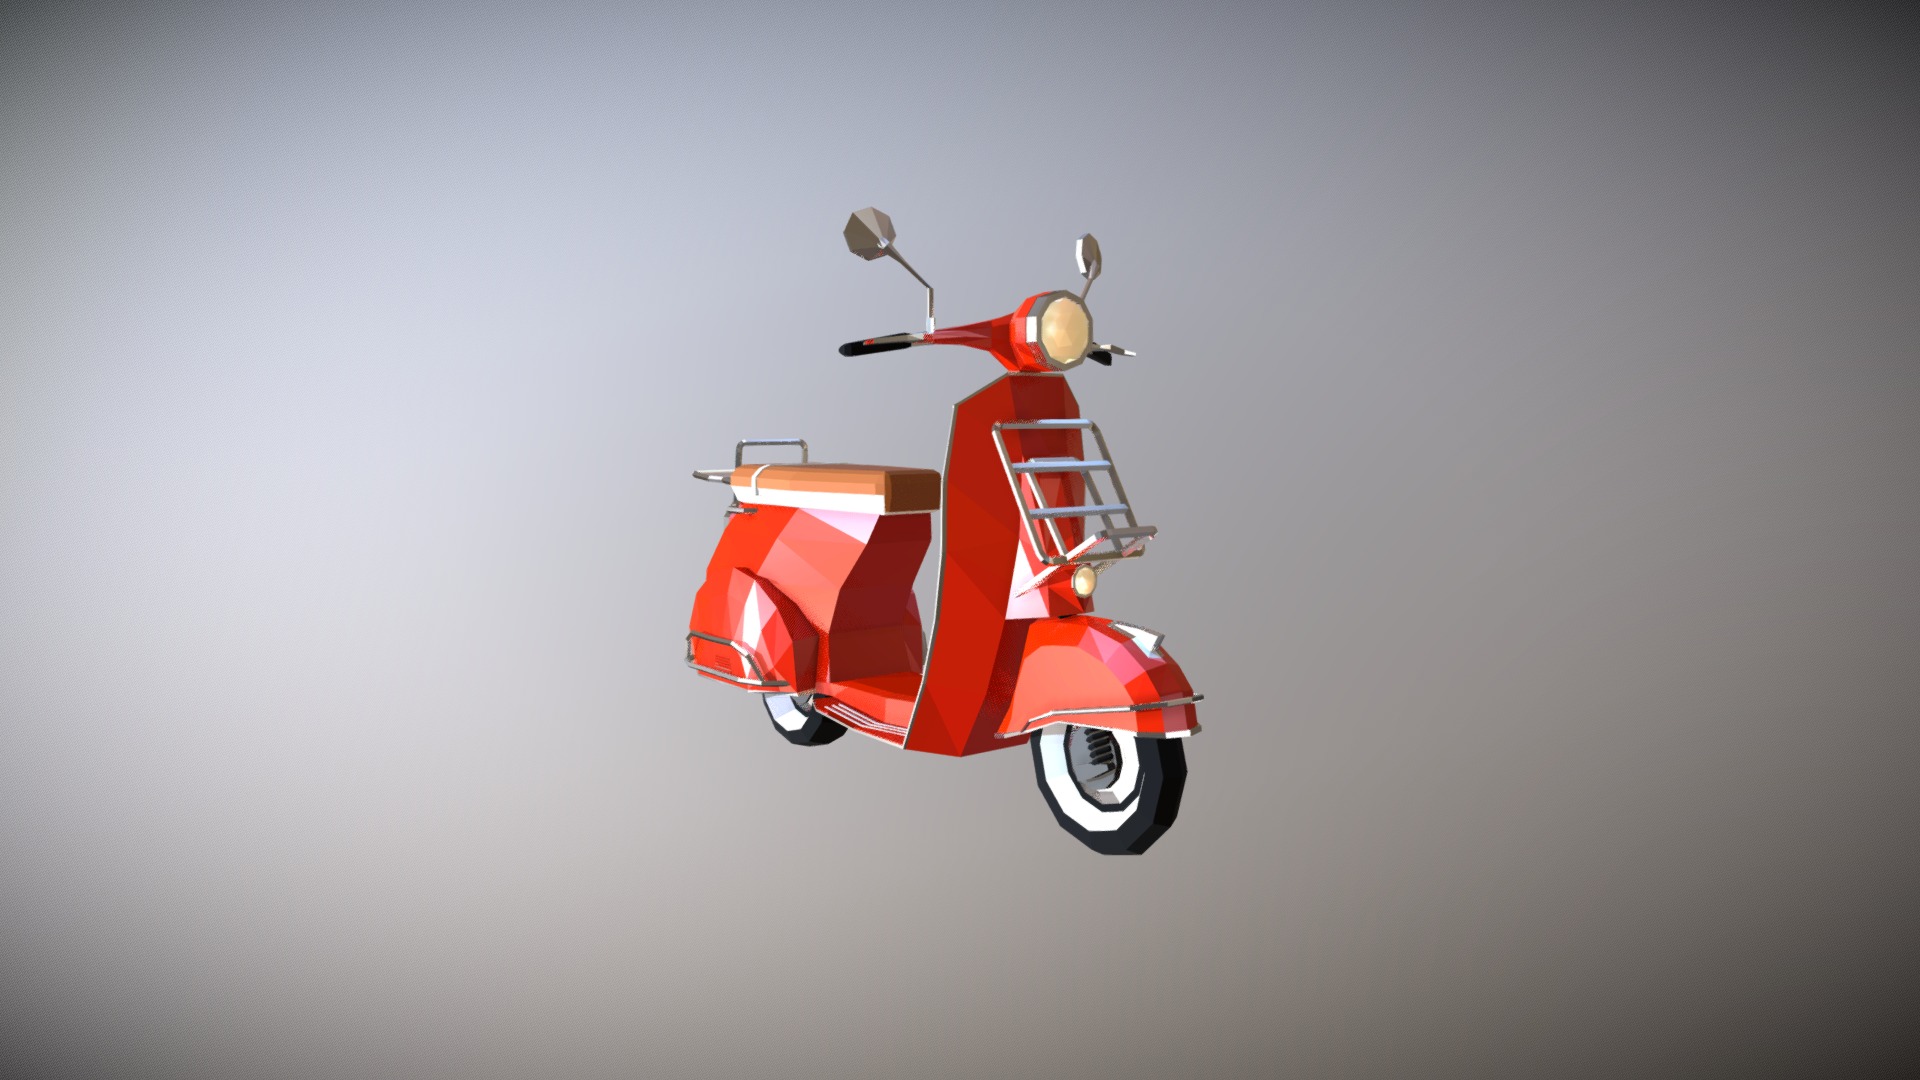 3D model Low Poly Scooter 03 - This is a 3D model of the Low Poly Scooter 03. The 3D model is about a small orange and white vehicle.